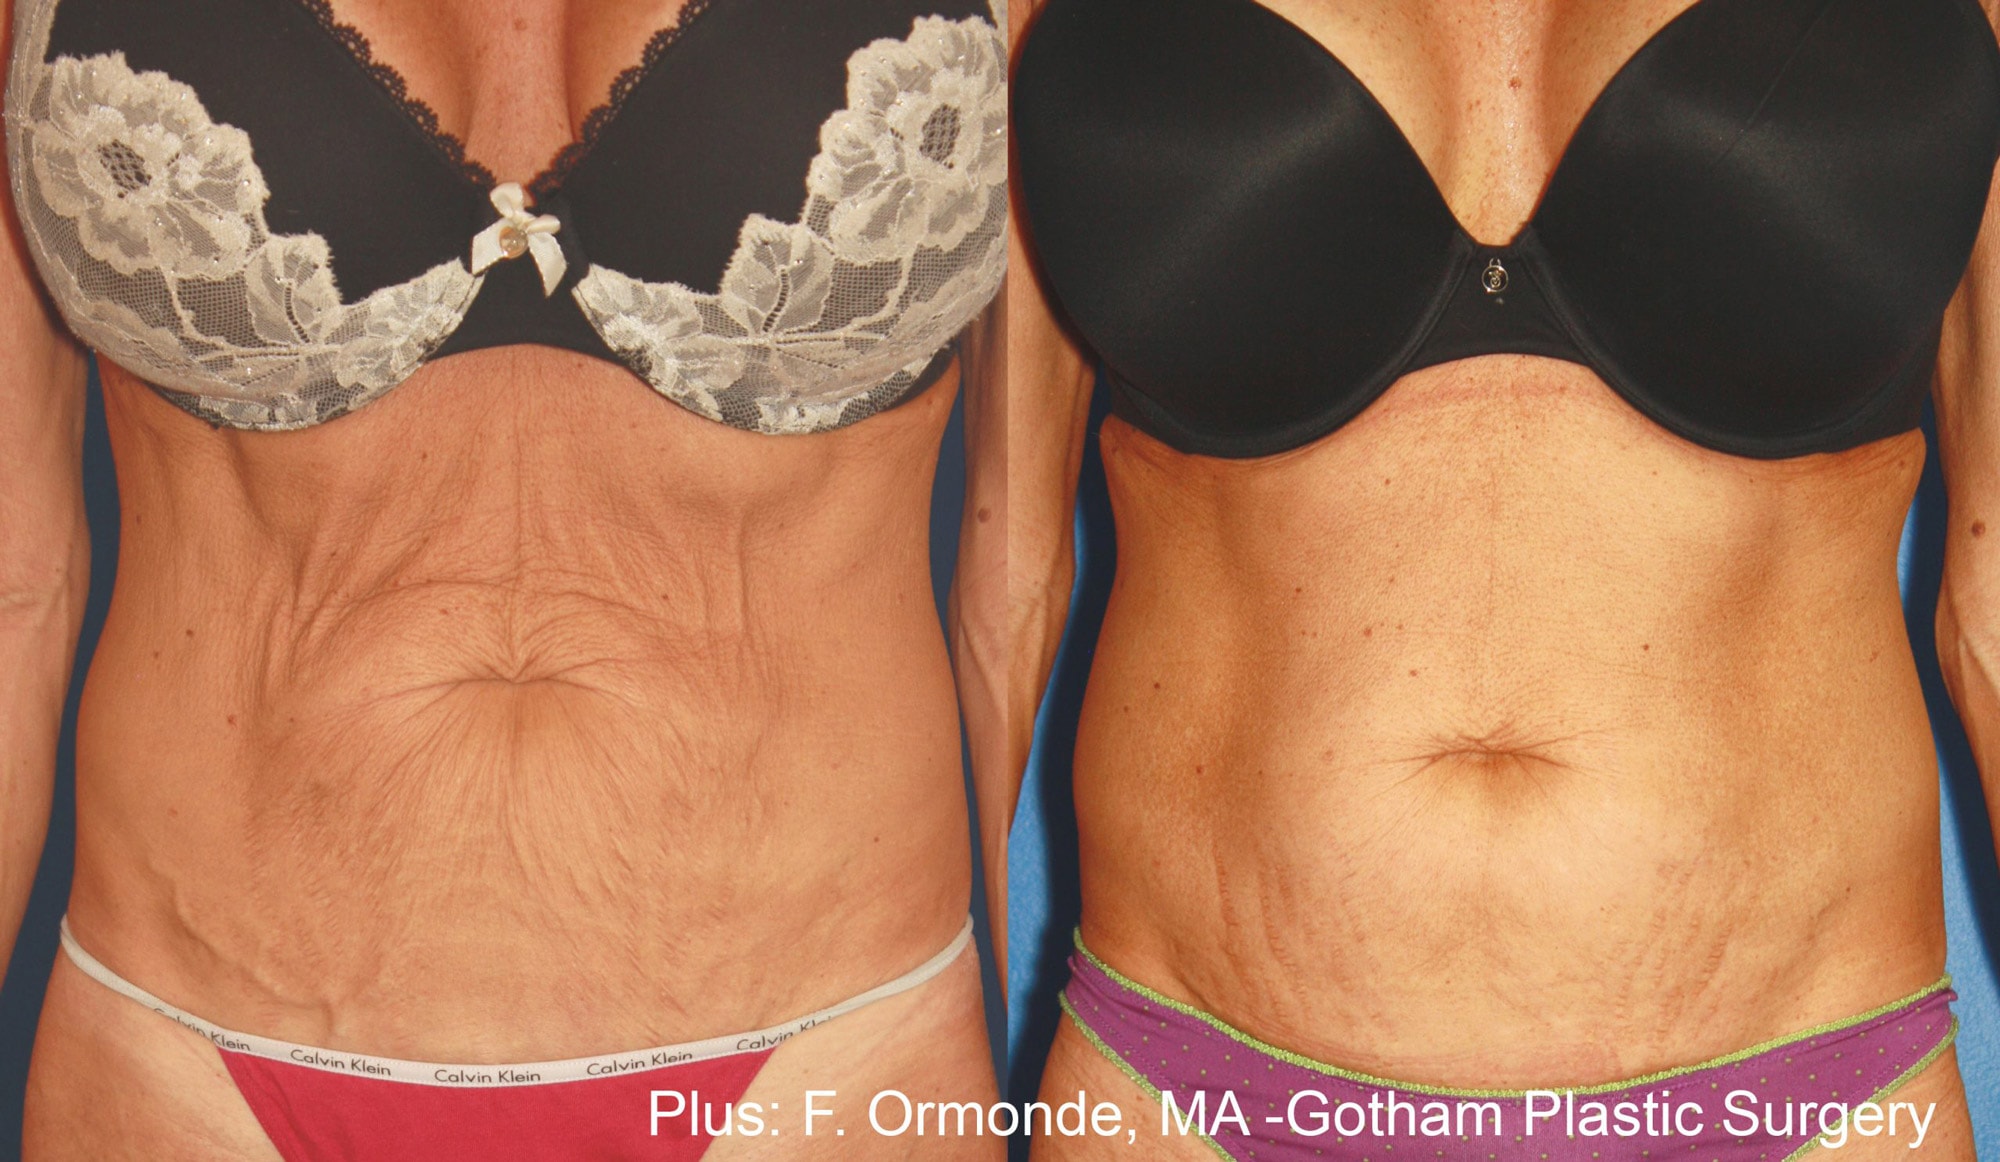 Before and After photos of Forma Plus treatments tightening loose skin and reducing wrinkles on a woman’s abdomen